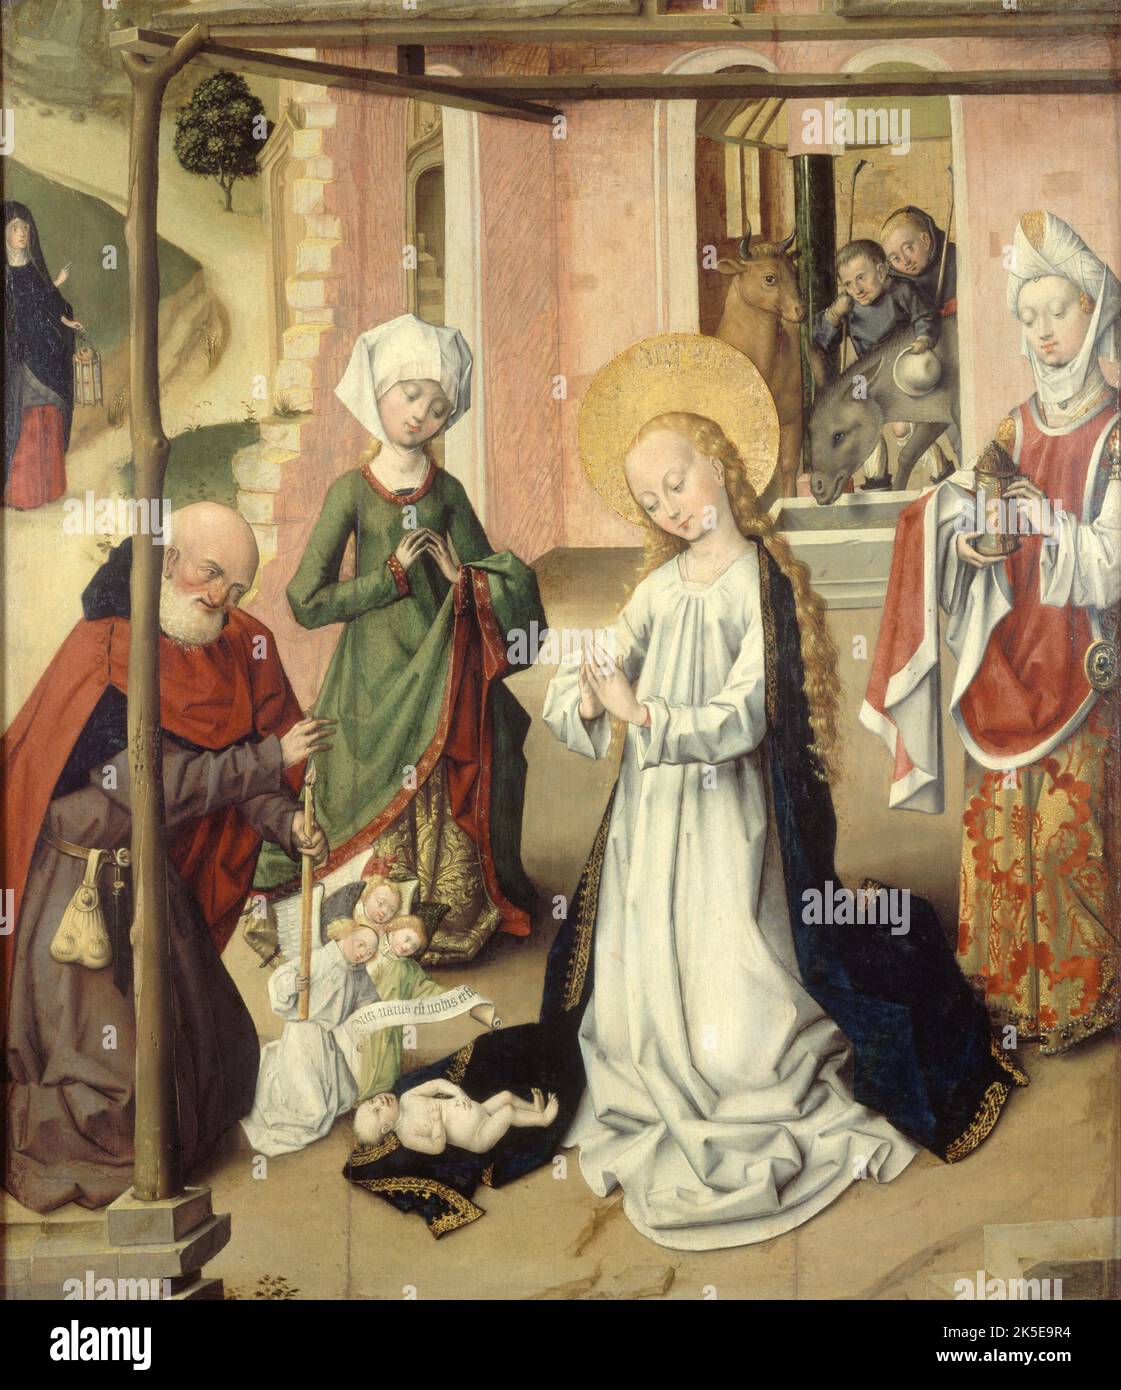 Adoration of the Child, between 1475 and 1510. Stock Photo